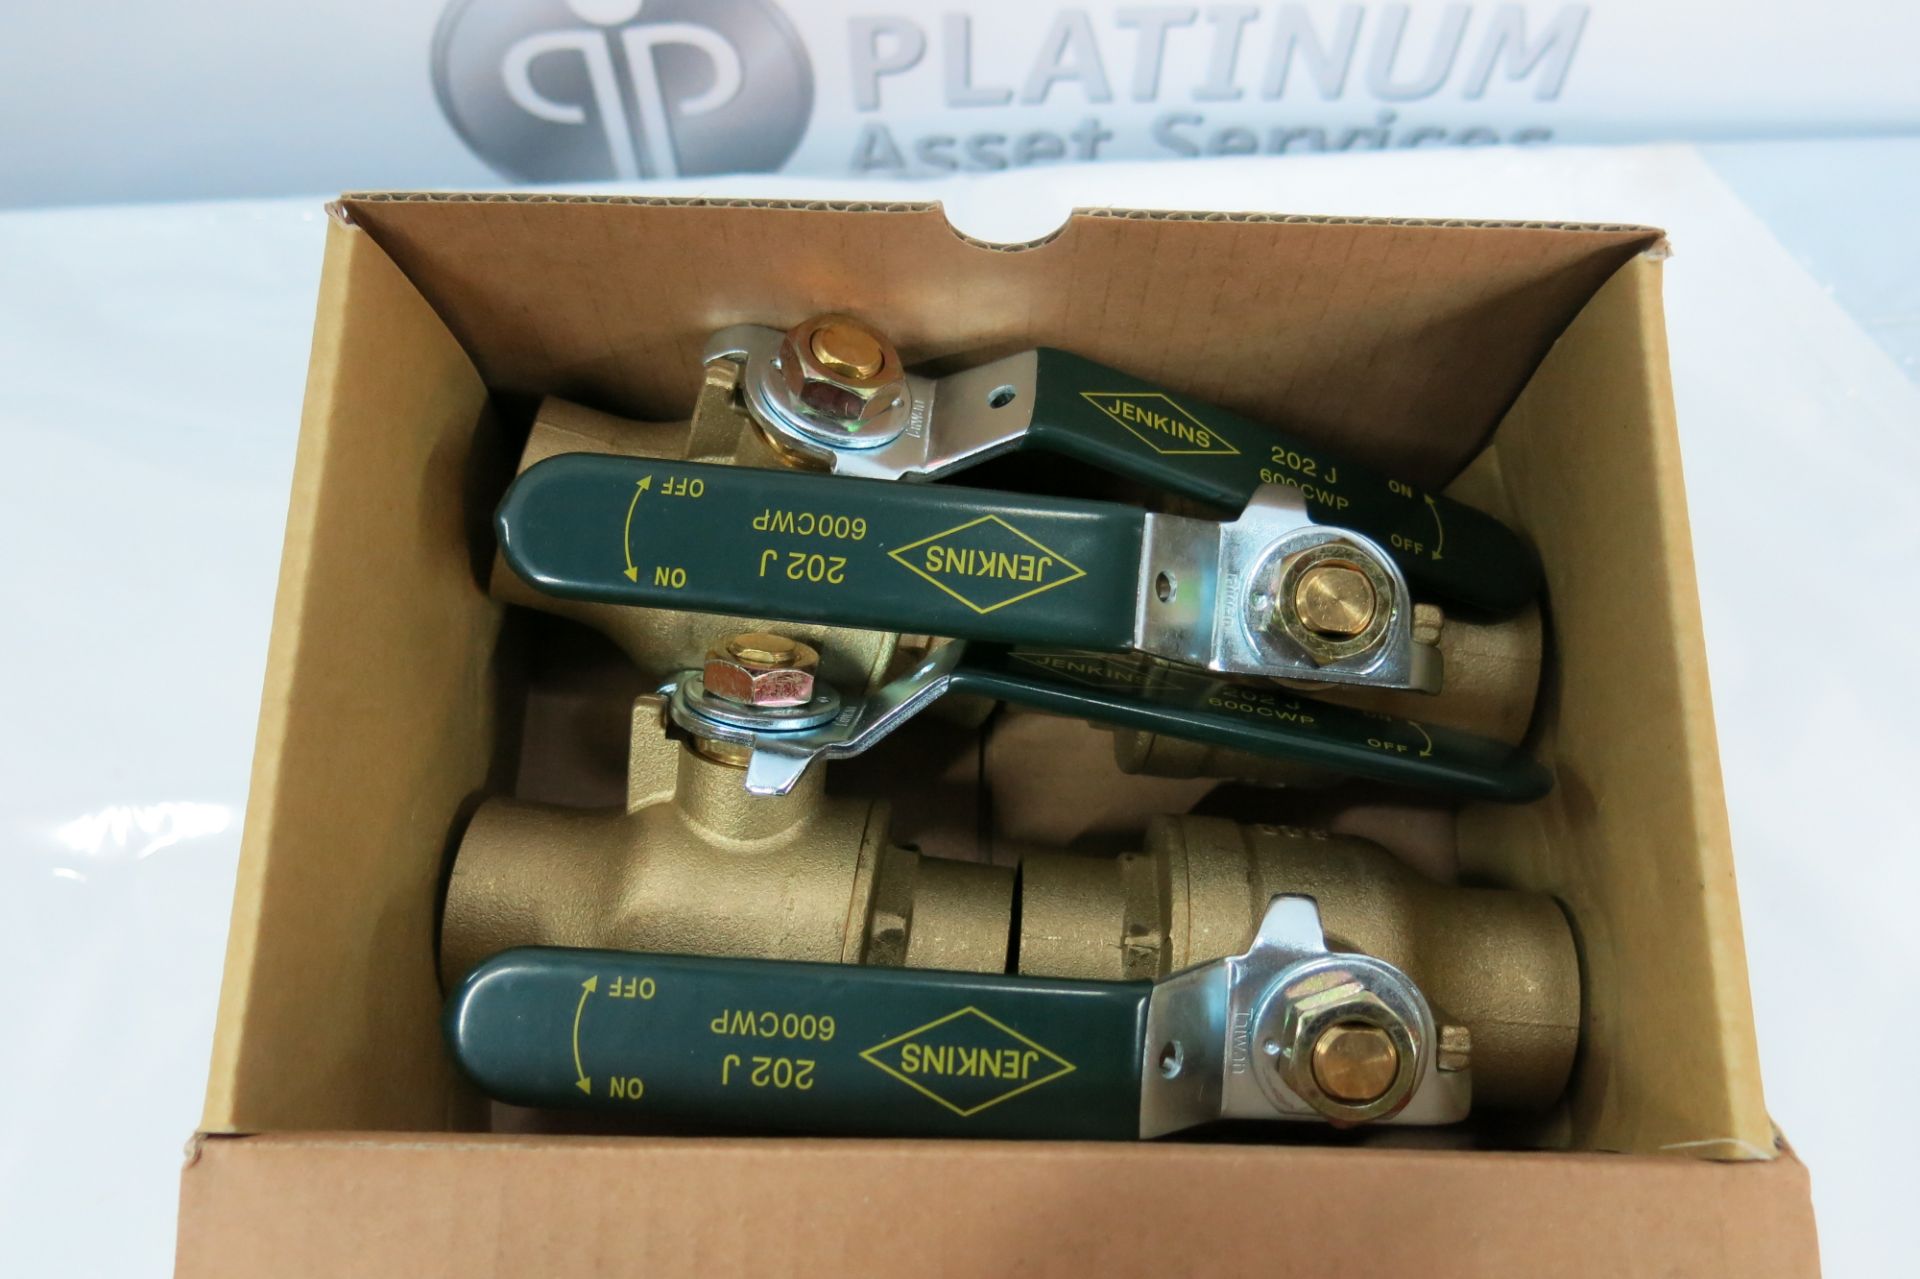 LOT OF JENKINS, 202J, 1 1/4", BALL VALVES - NEW (LOCATED IN SCARBOROUGH) - Image 2 of 3